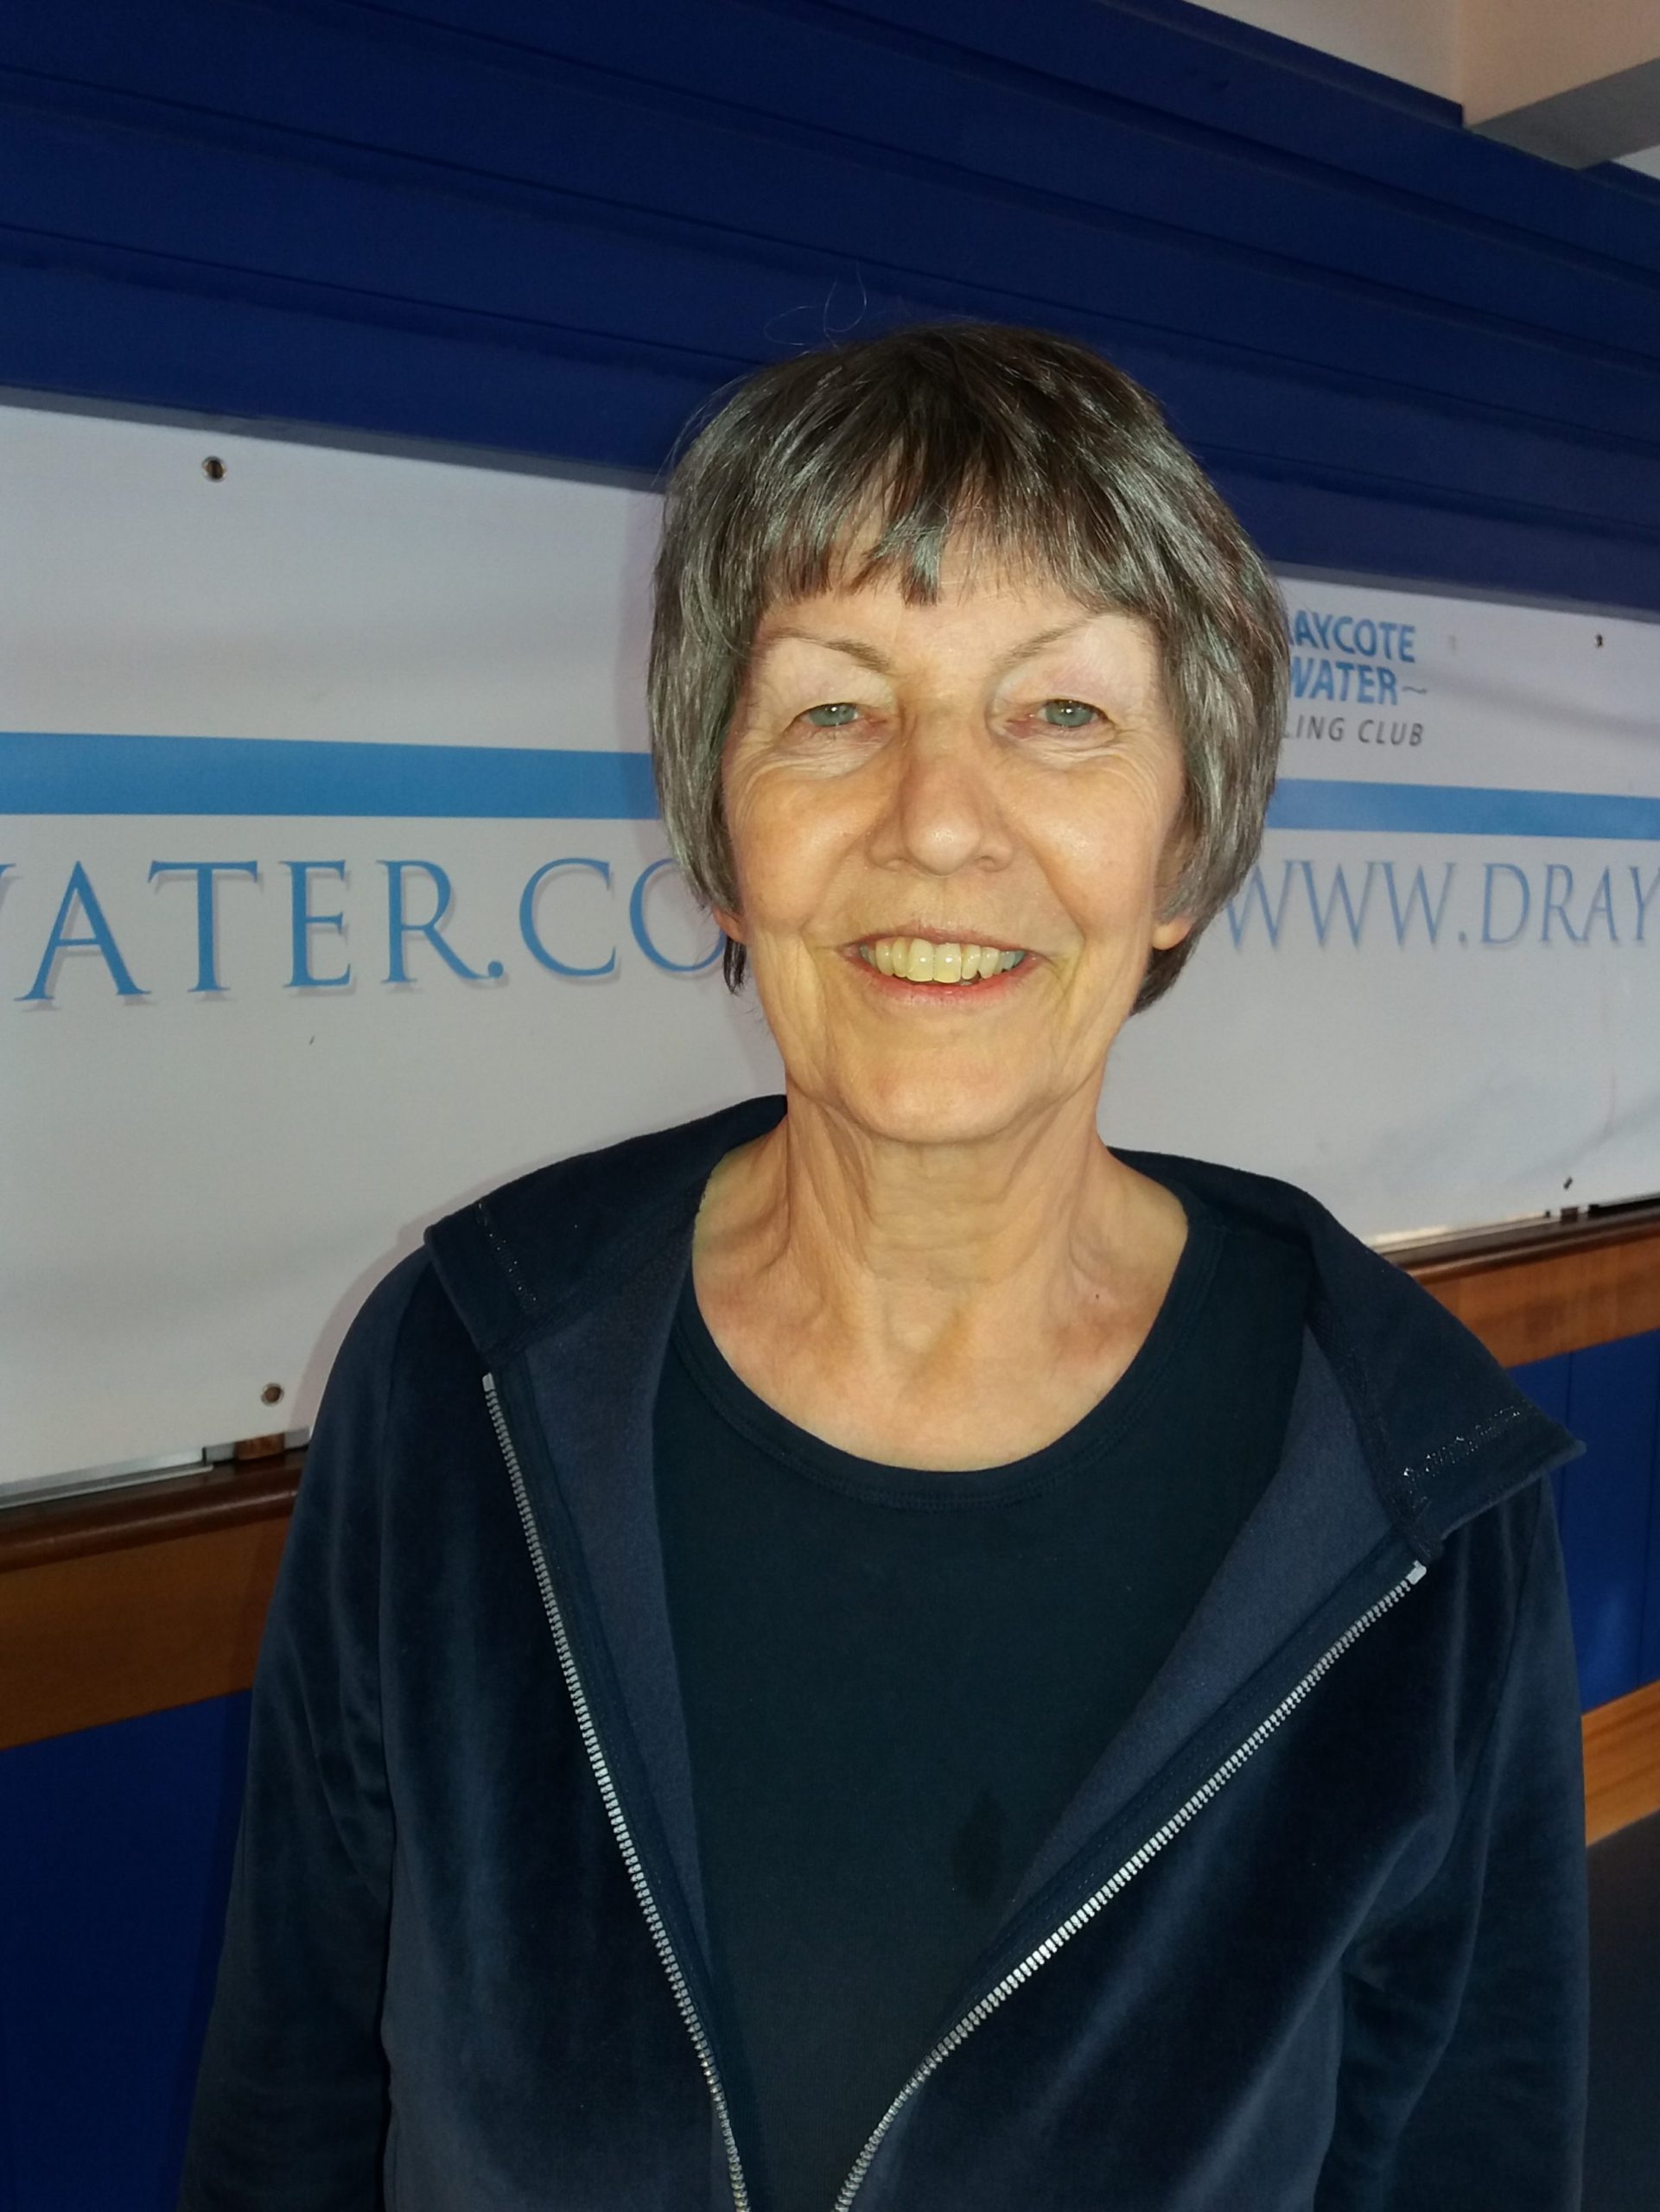 Committee Focus – Christine Silver